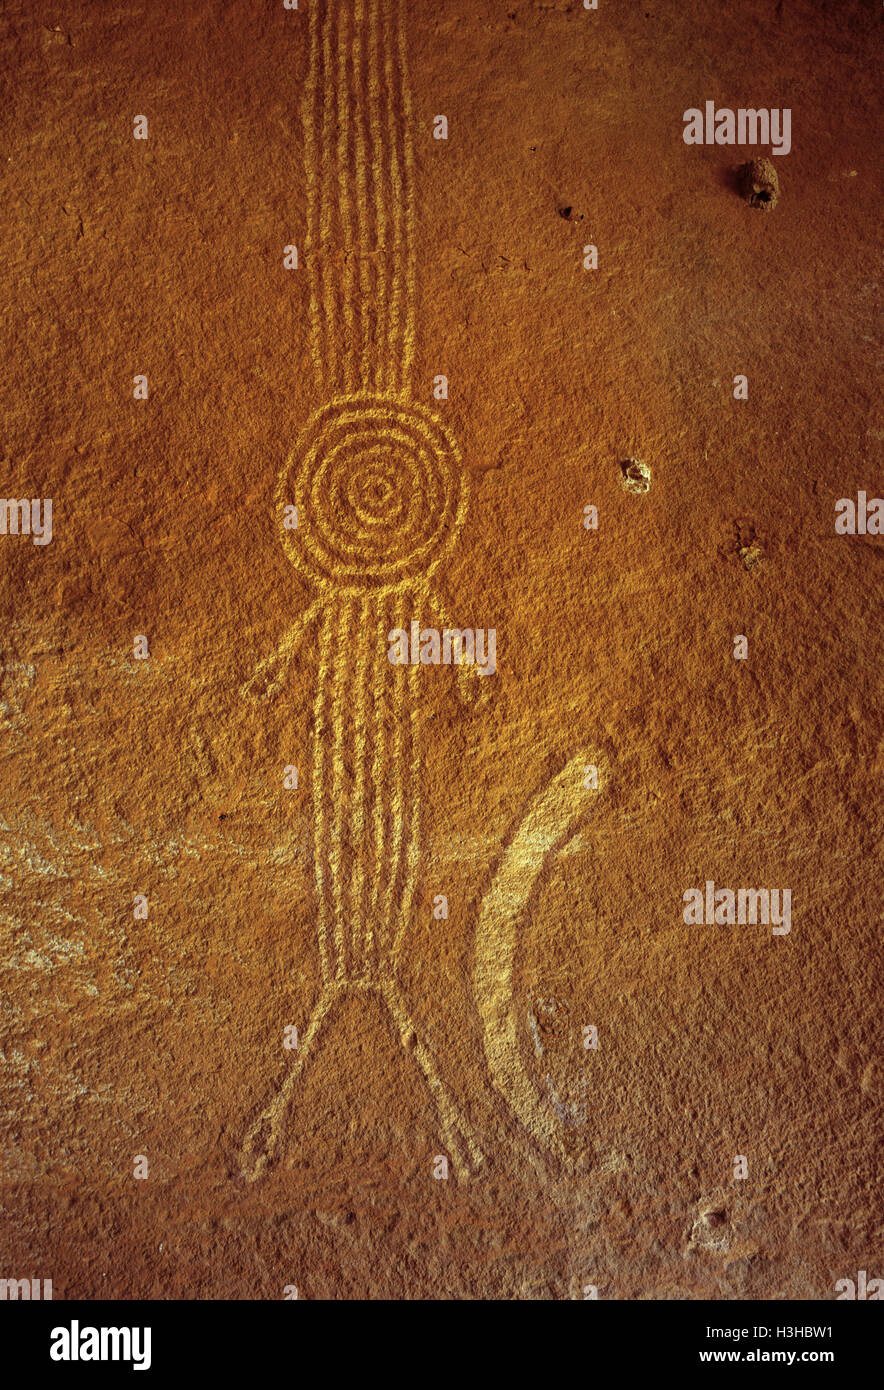 Aboriginal rock painting, Killagurra Springs (Well 17 on Canning Stock Route) Stock Photo